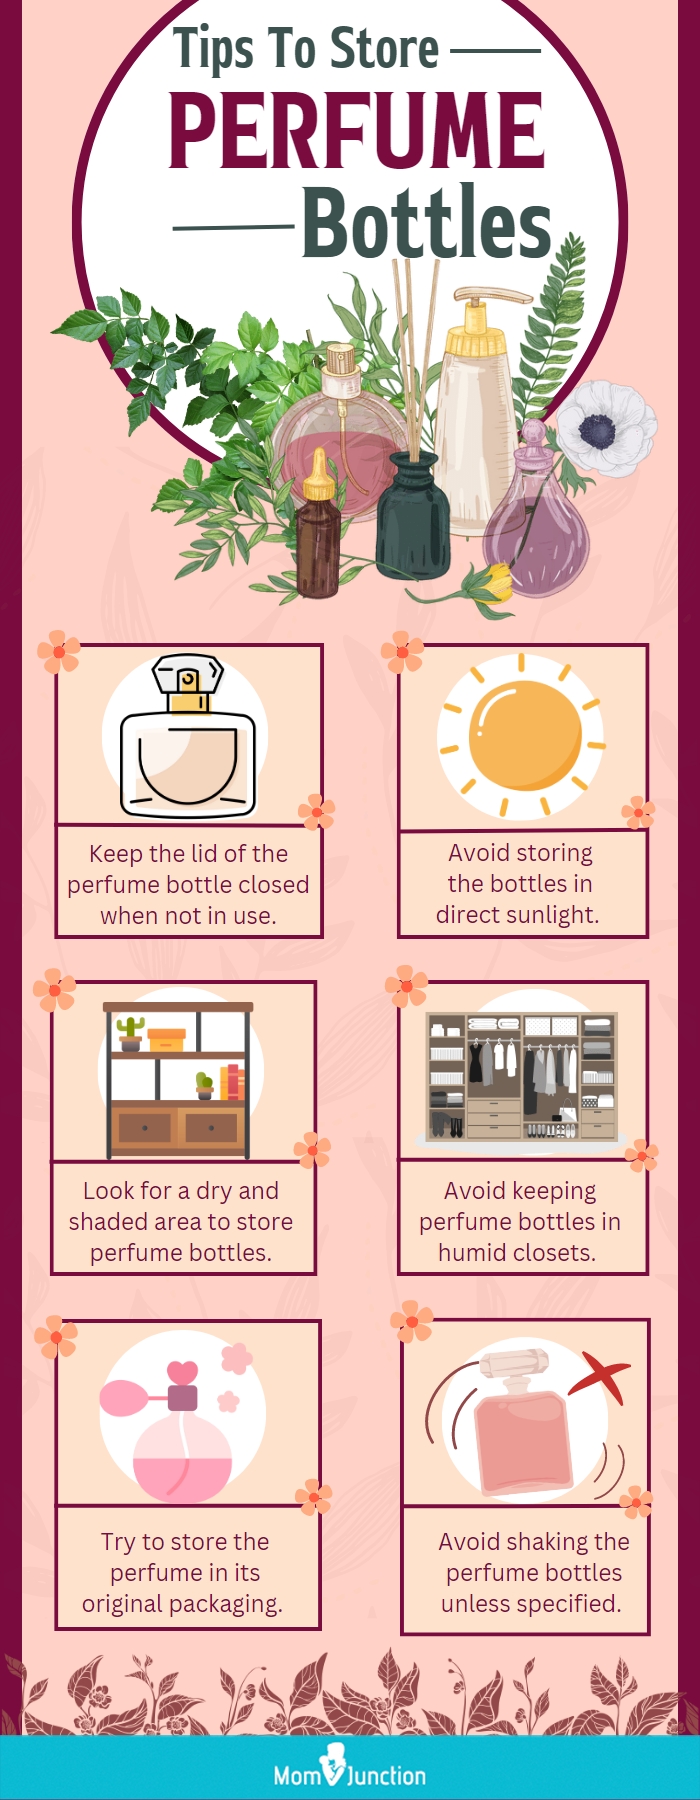 Tips To Store Perfume Bottles